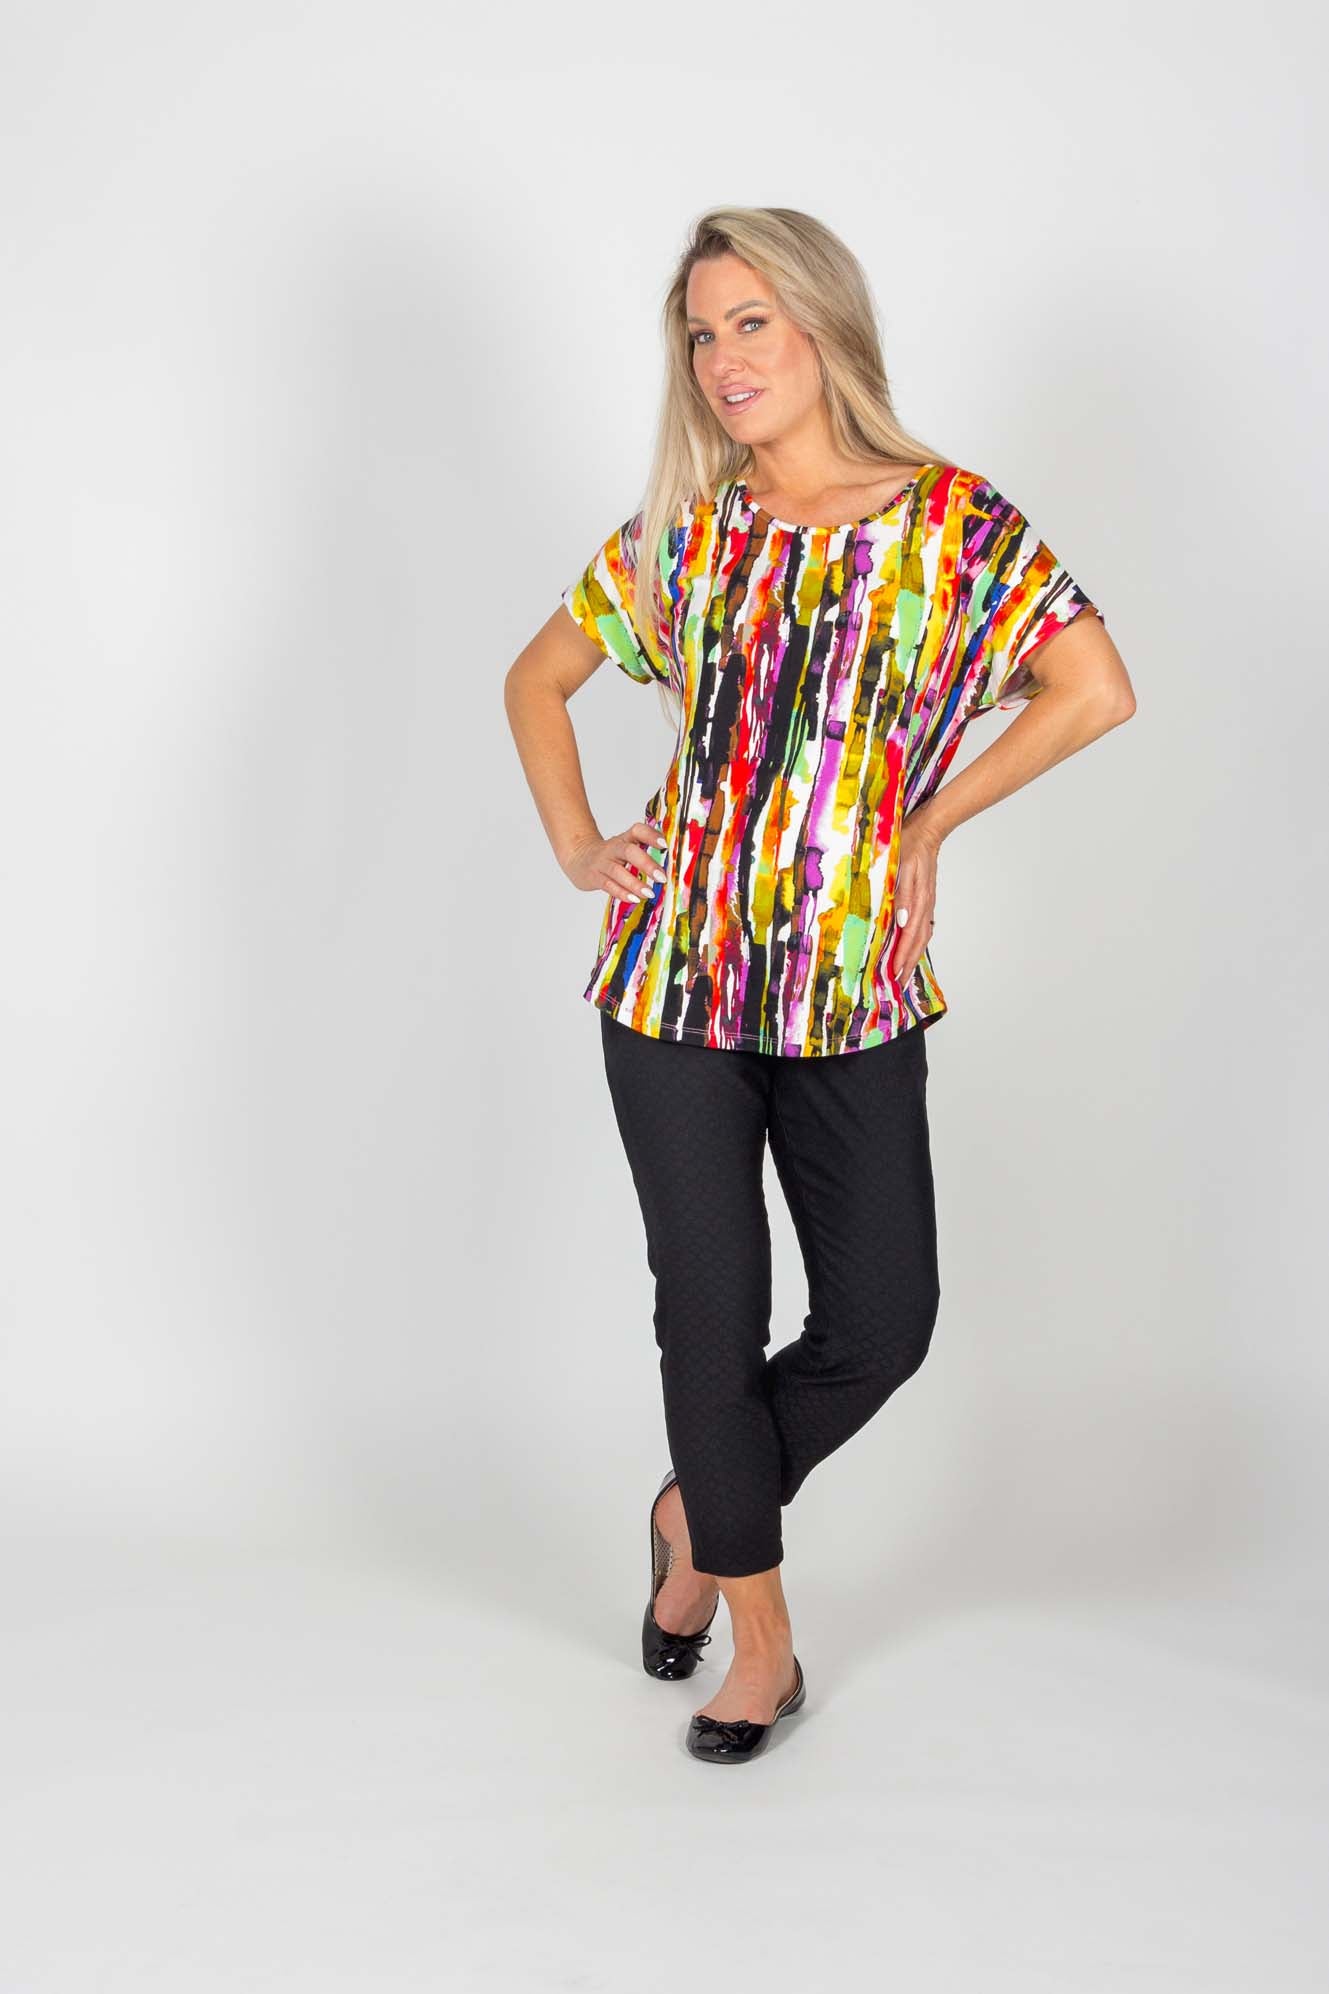 A woman wearing the Chichi Top by Pure Essence in Multicolour Print with the  Caroline Pant in Black is standing in front of a white background